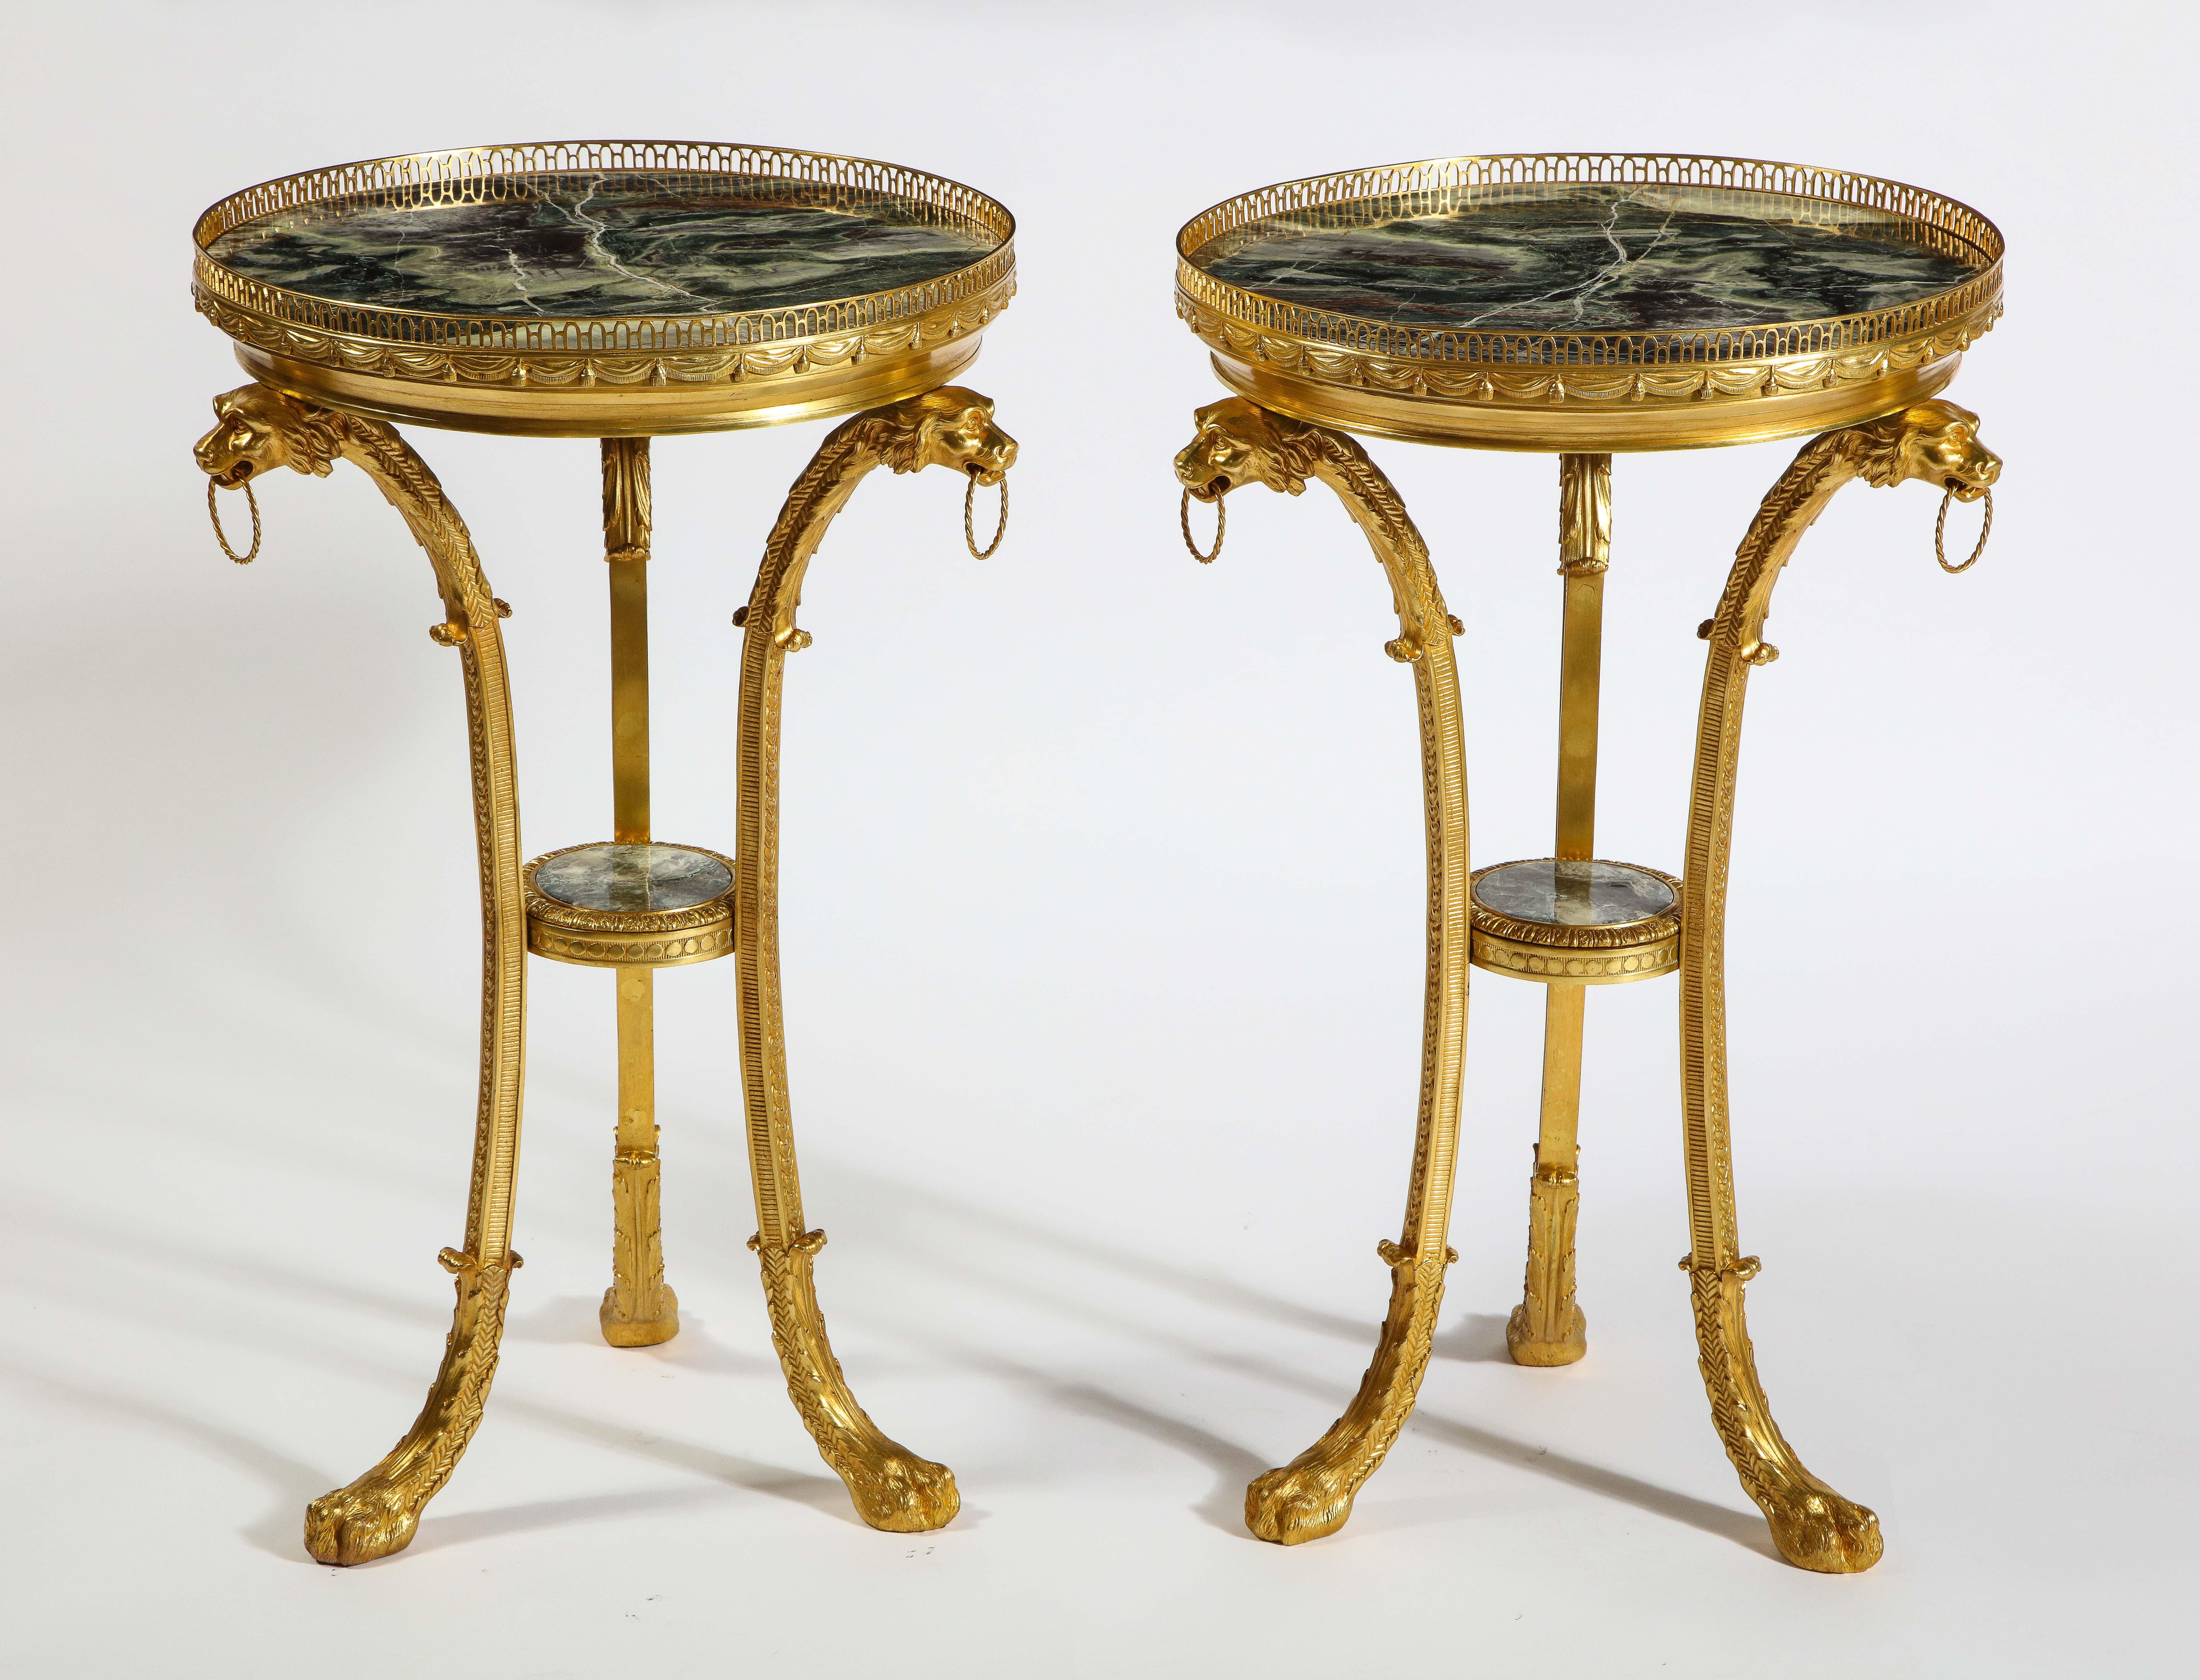 A magnificent pair of Russian neoclassical style gilt bronze and marble-top guéridons, based on a design by Andrei Voronikhin. This piece is beautifully cast and hand-chiseled, producing an exceptional, well-crafted pair of guéridons. Each table is